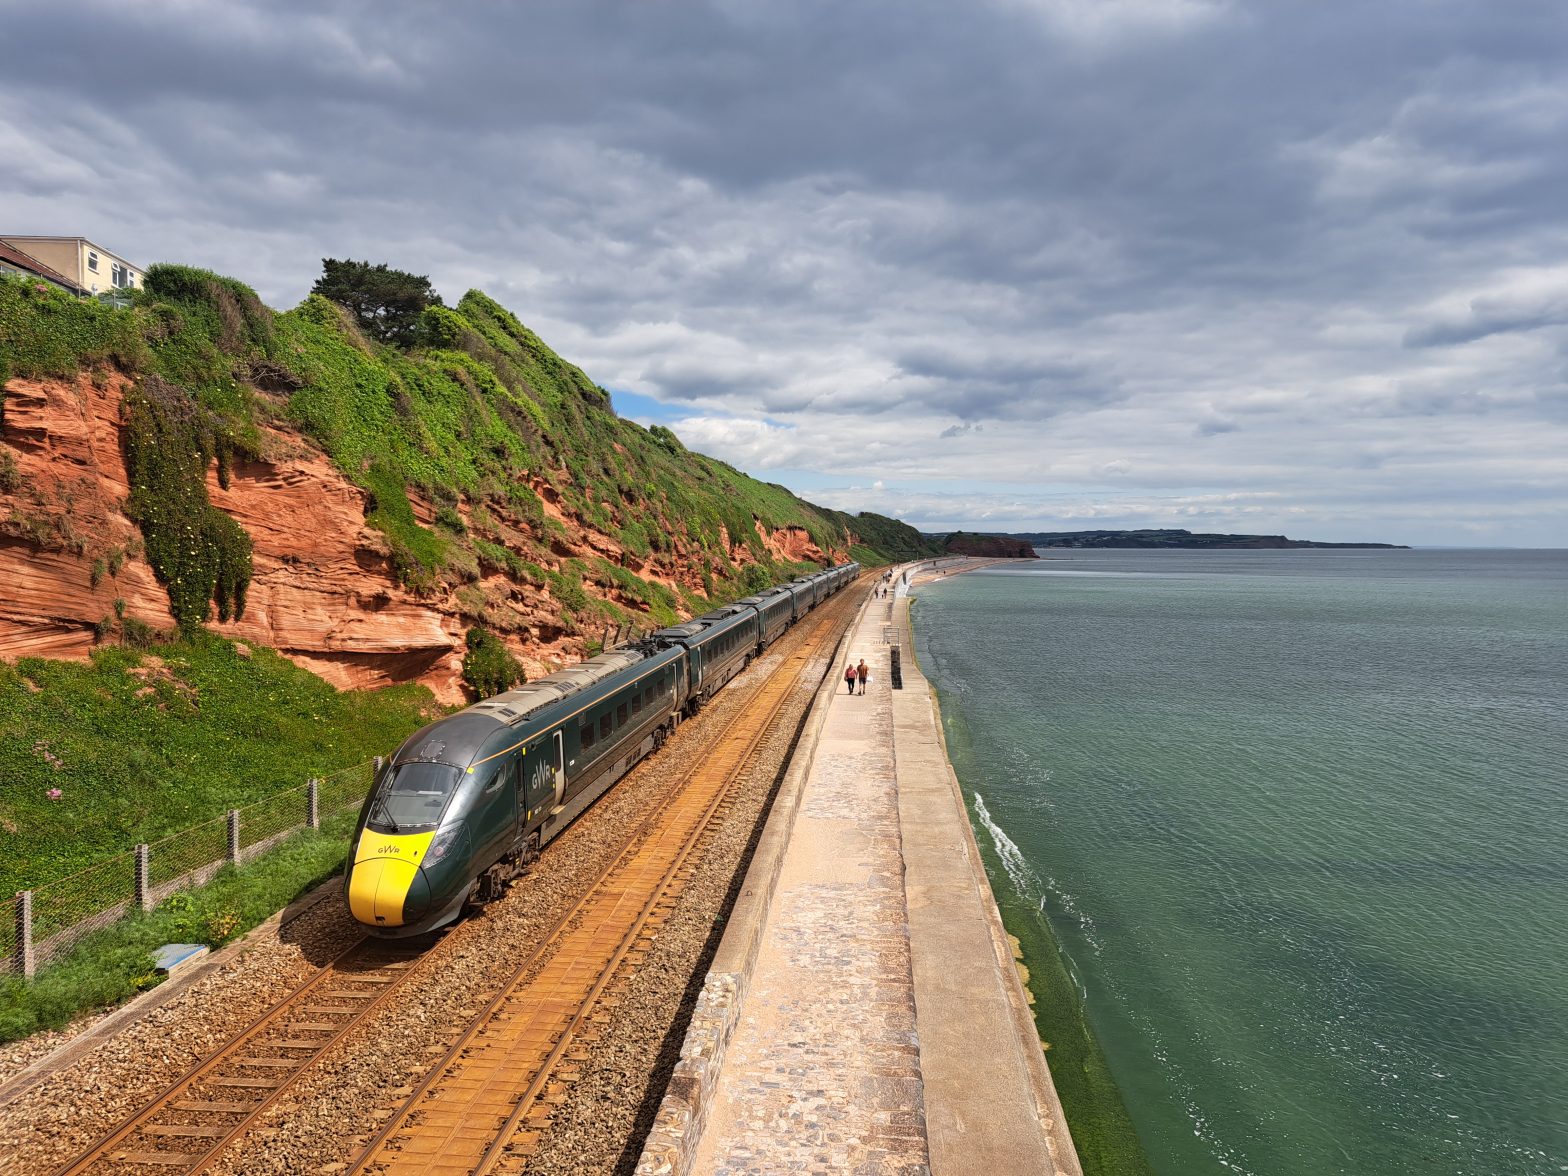 dawlish sea wall route, used by trains in devon and cornwall